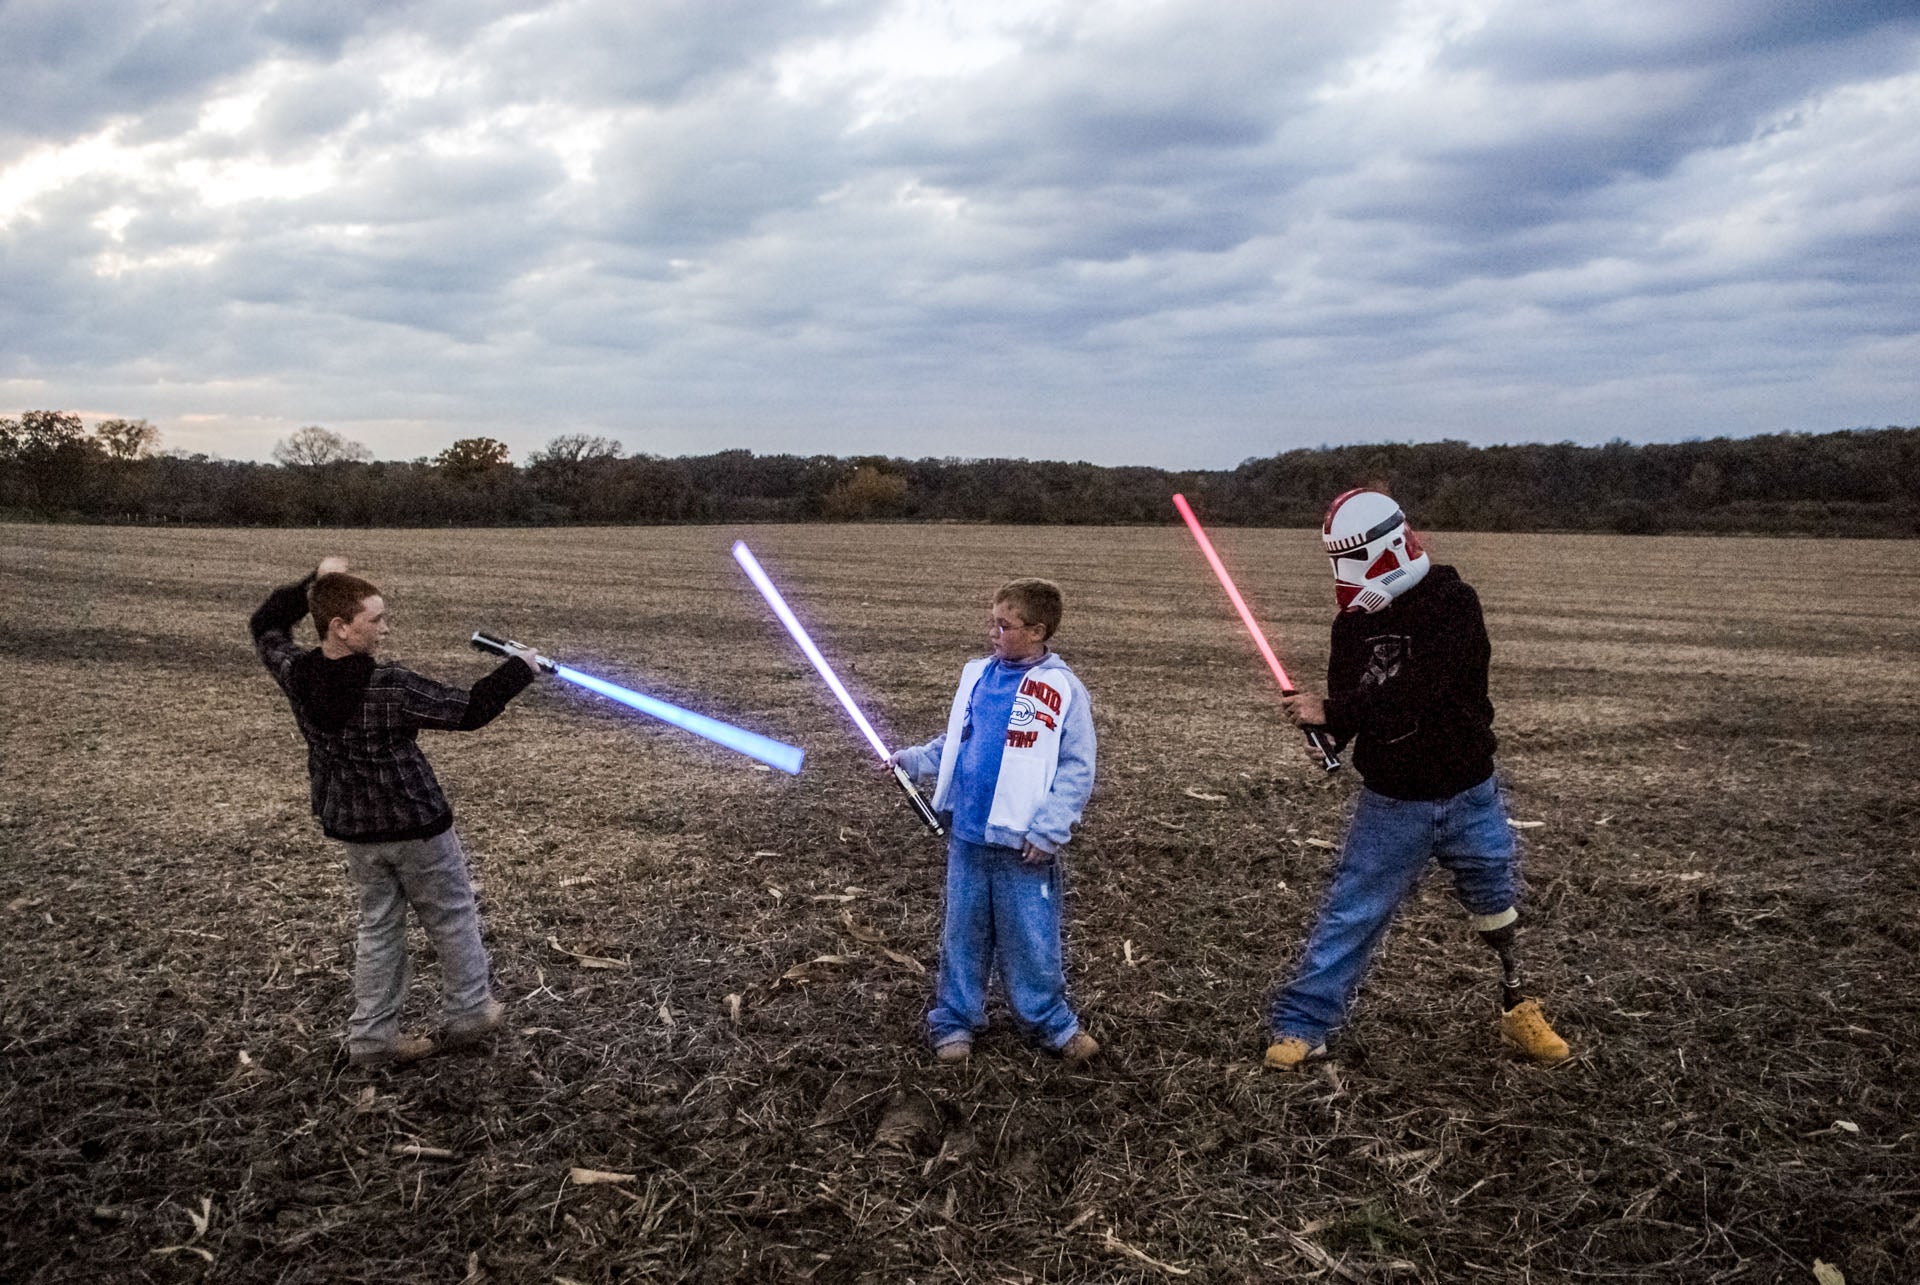 Raymond Hubbard, who lost his leg to a rocket attack in Iraq on 4 July 2006, plays Star Wars with his sons Brady and Riley in Darien, Wisconsin in 2007.